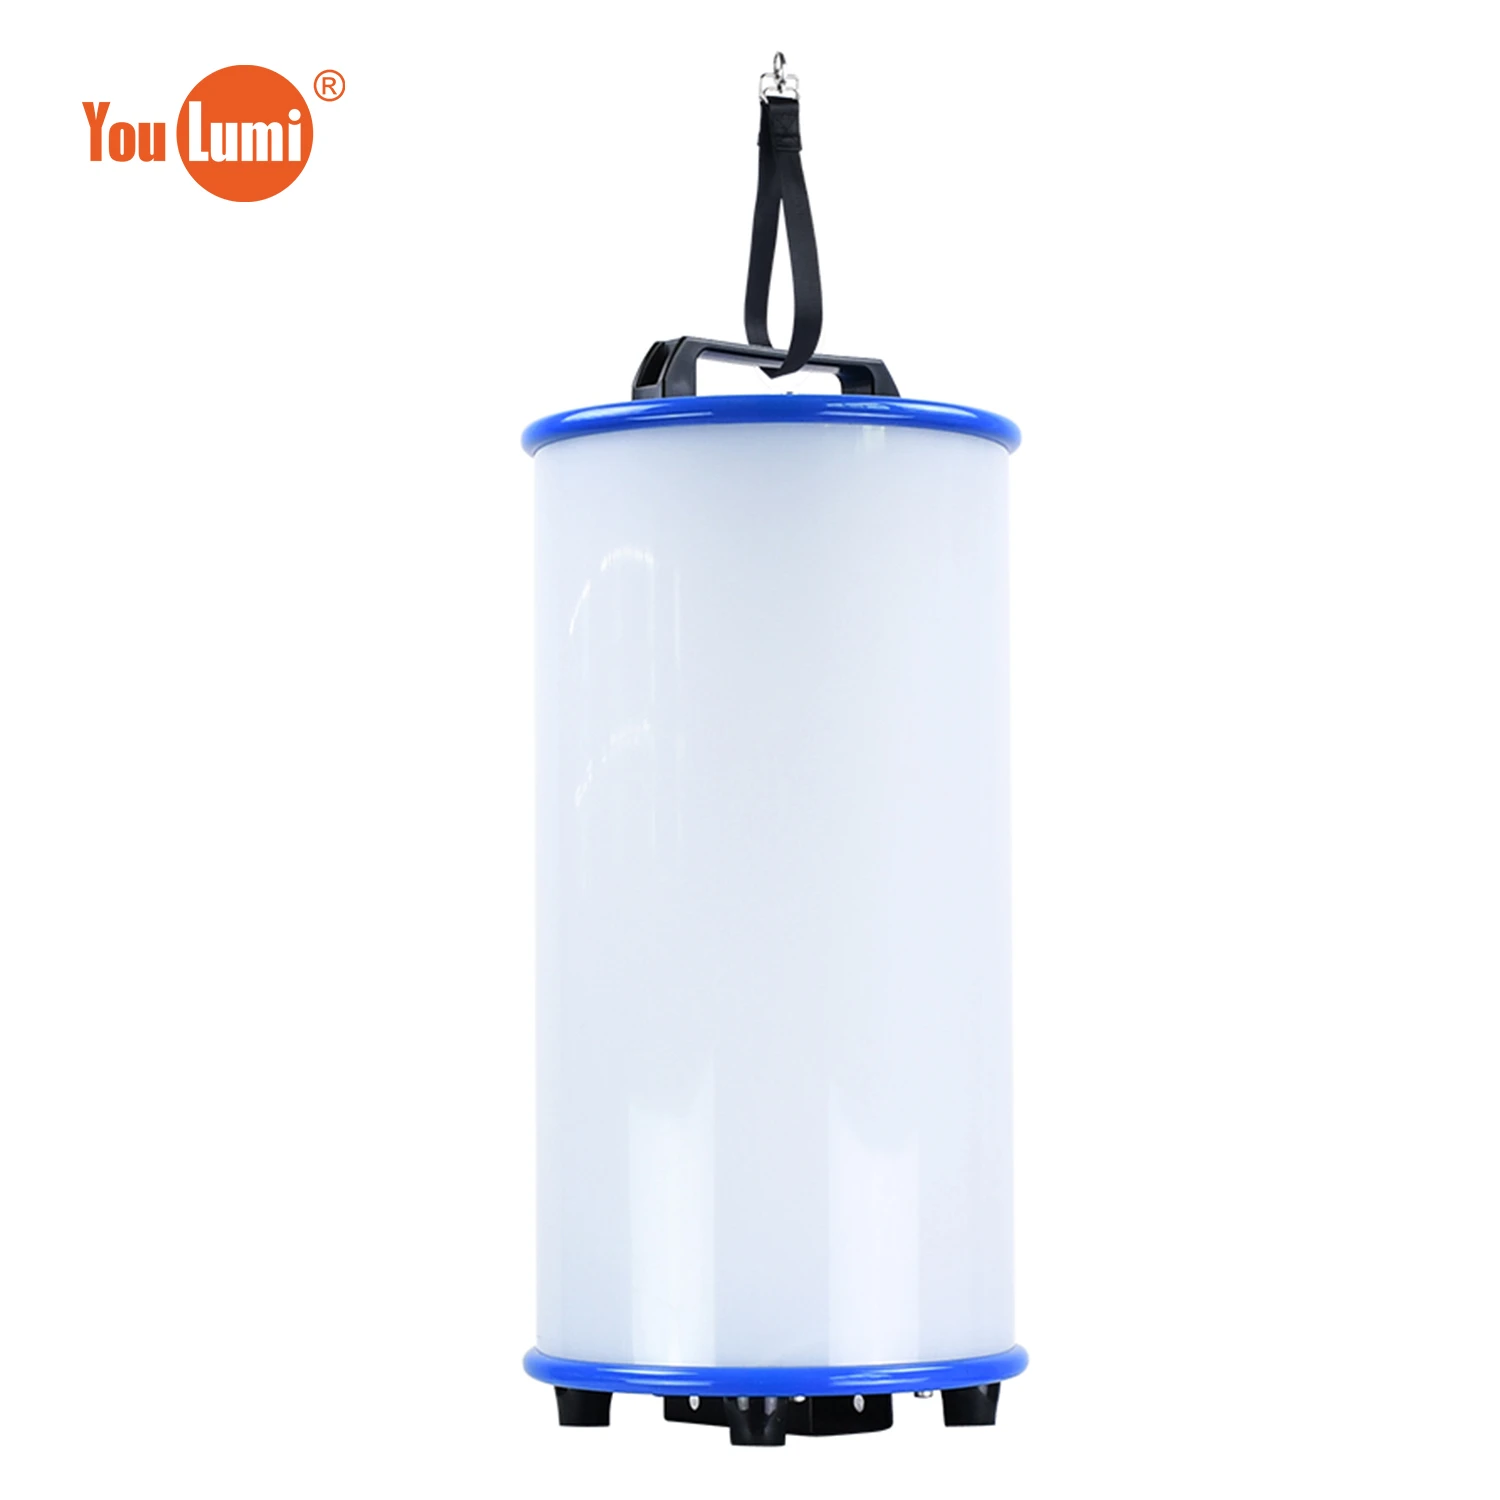 Portable work balloon lamp is suitable for road maintenance and camping  360 beam angle LED balloon work lighting